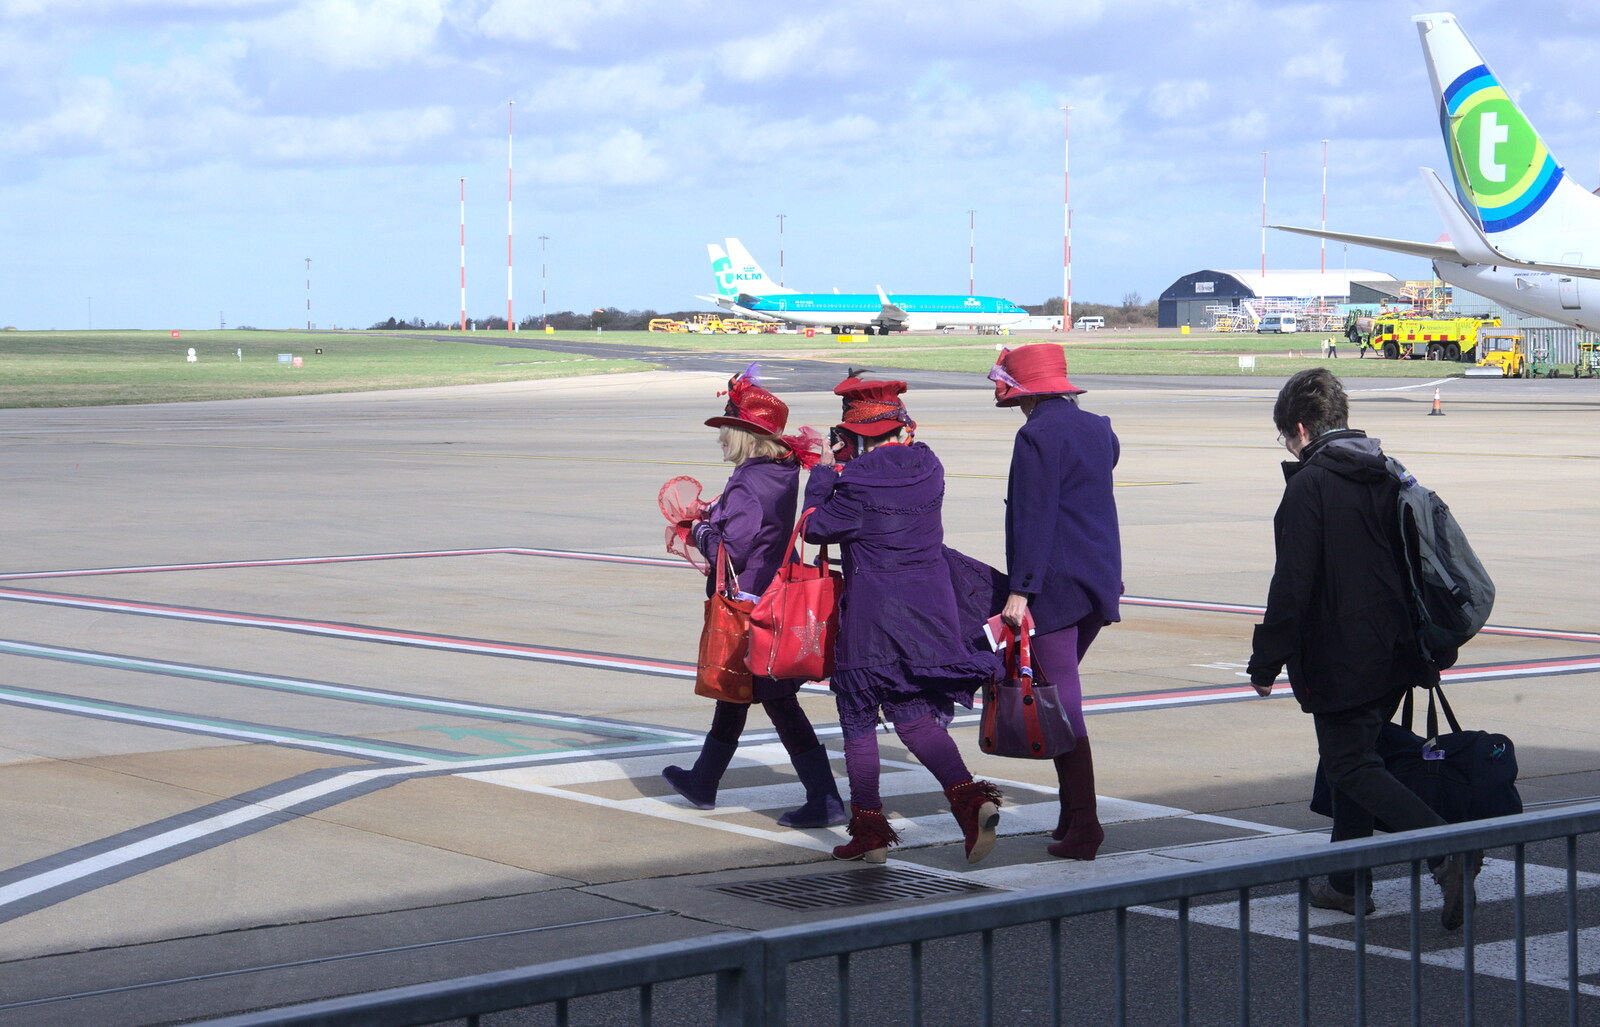 Some purple passengers head to the plane from Devon In A Day, Exeter, Devon - 14th March 2019